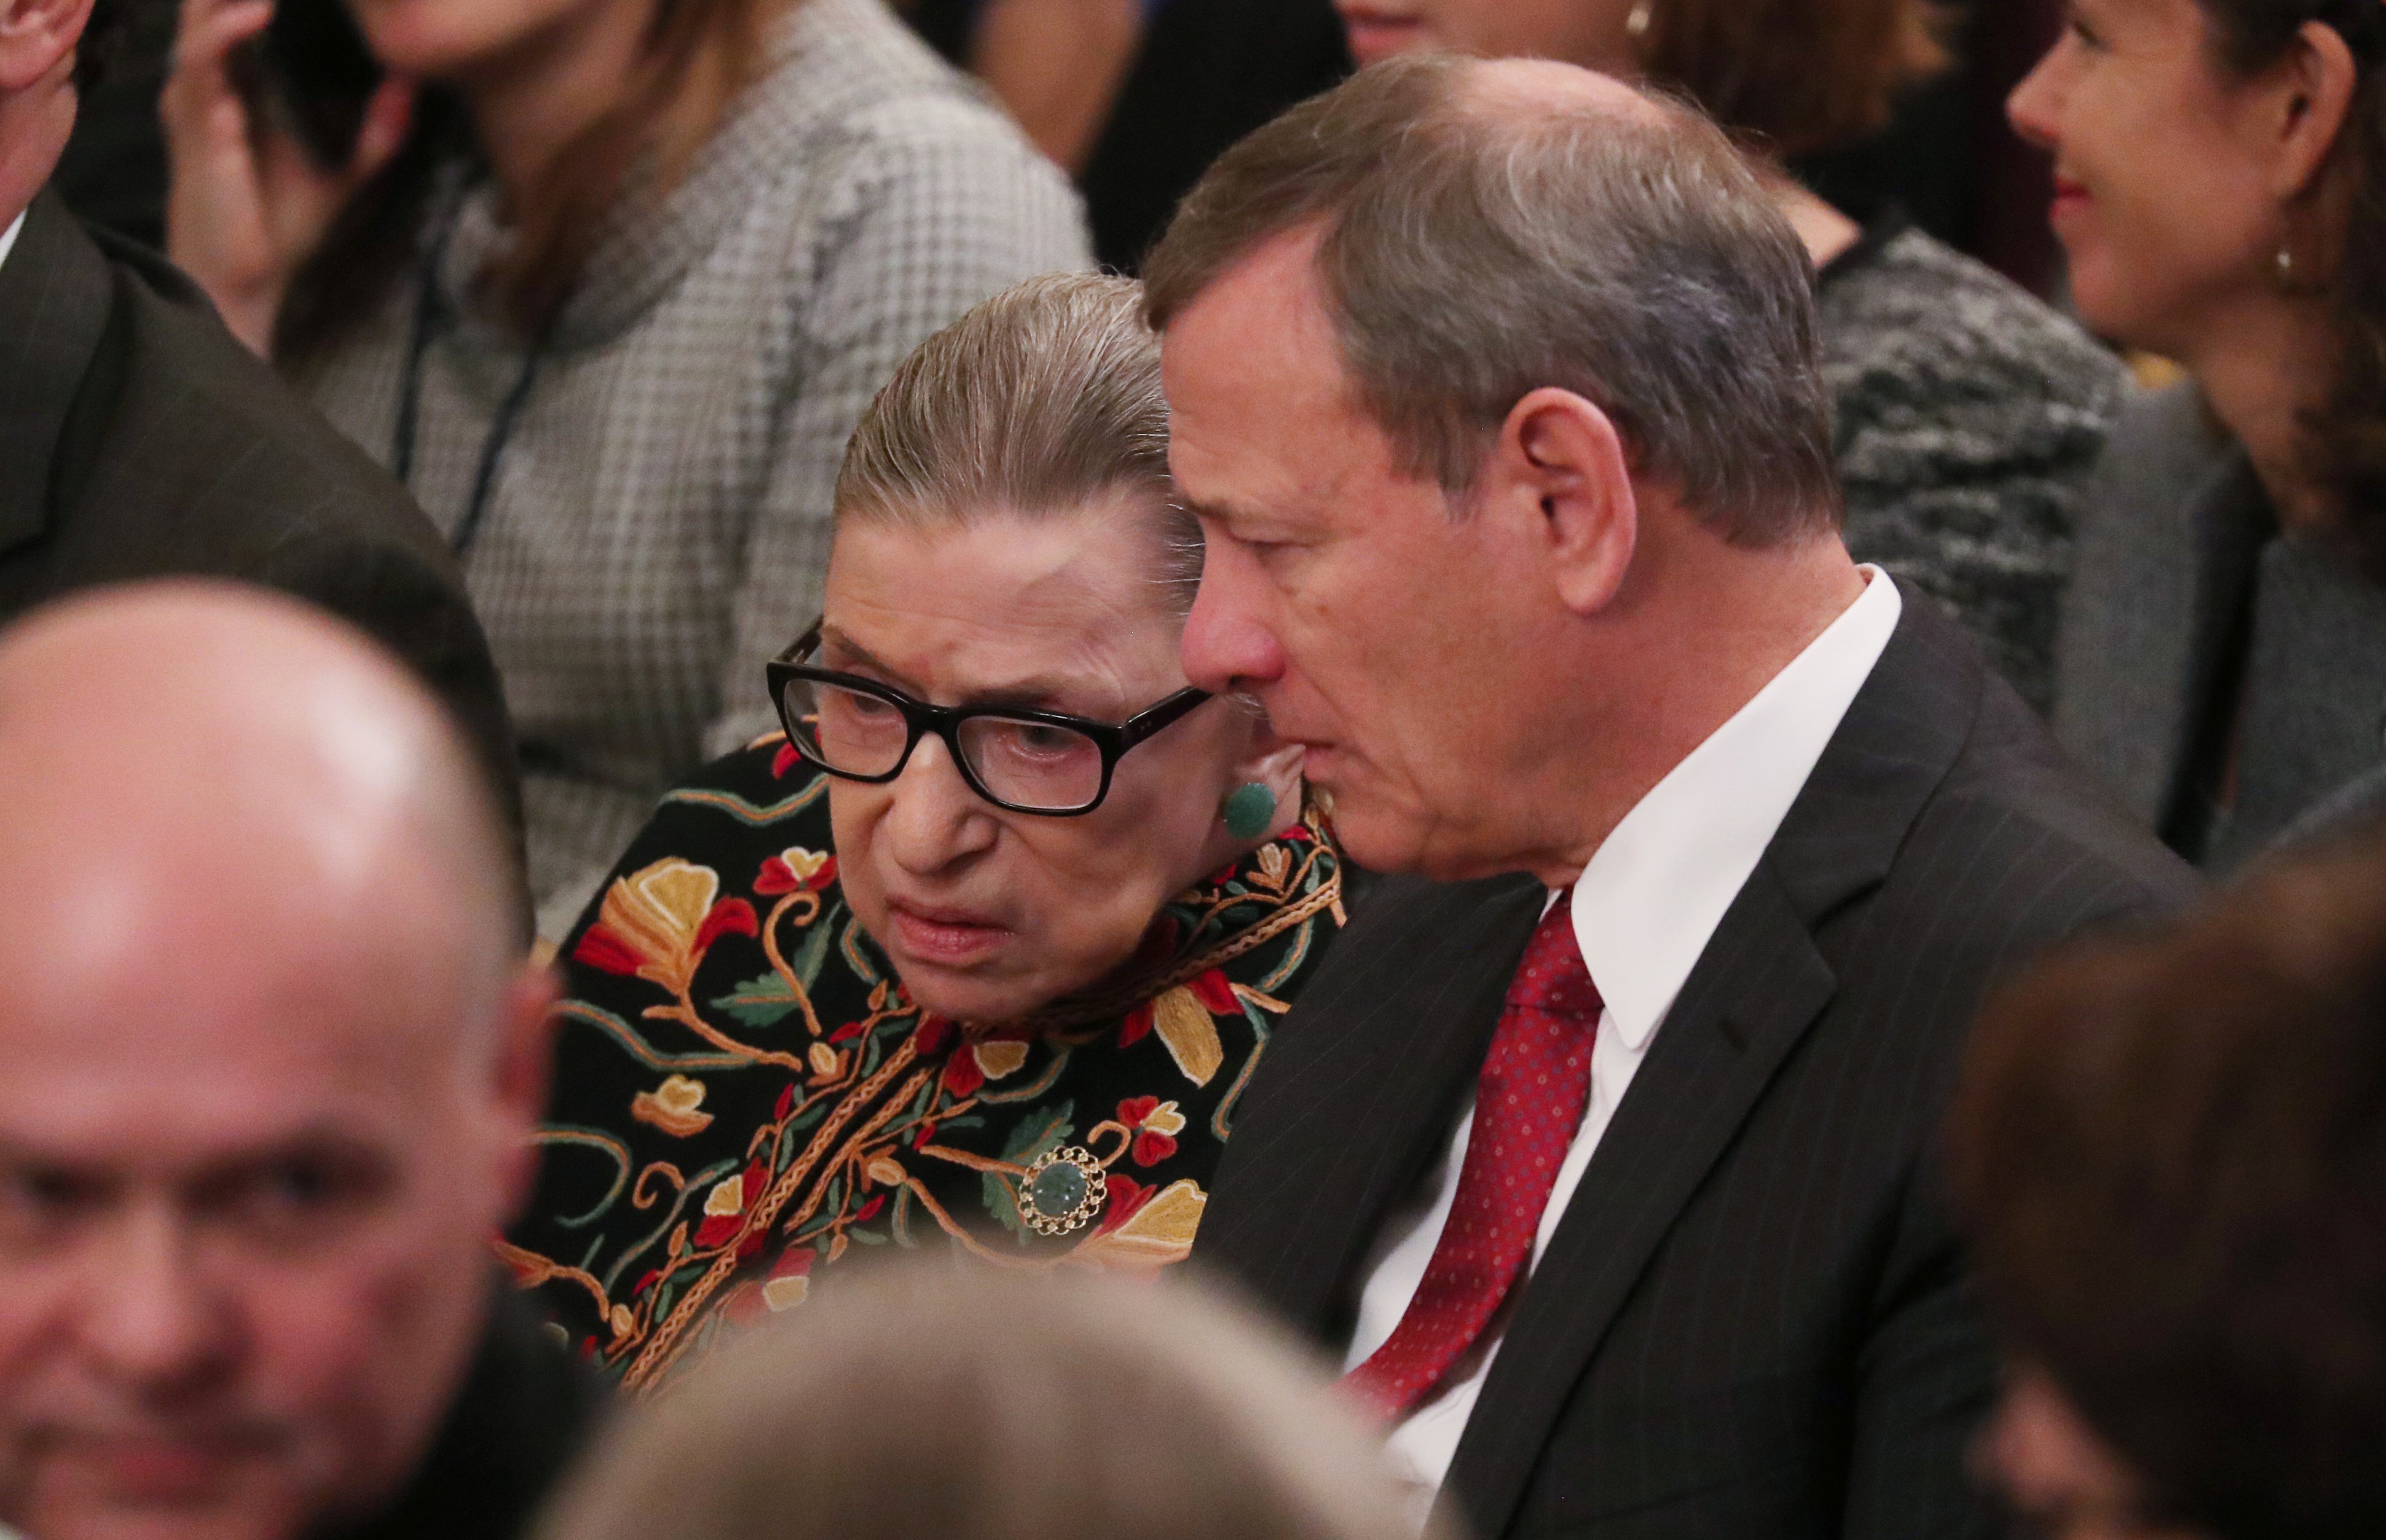 Justice Ruth Bader Ginsburg talks with Chief Justice John Roberts as they attend a ceremony with President Donald Trump awarding the 2018 Presidential Medals of Freedom at the White House on November 16, 2018. REUTERS/Jonathan Ernst